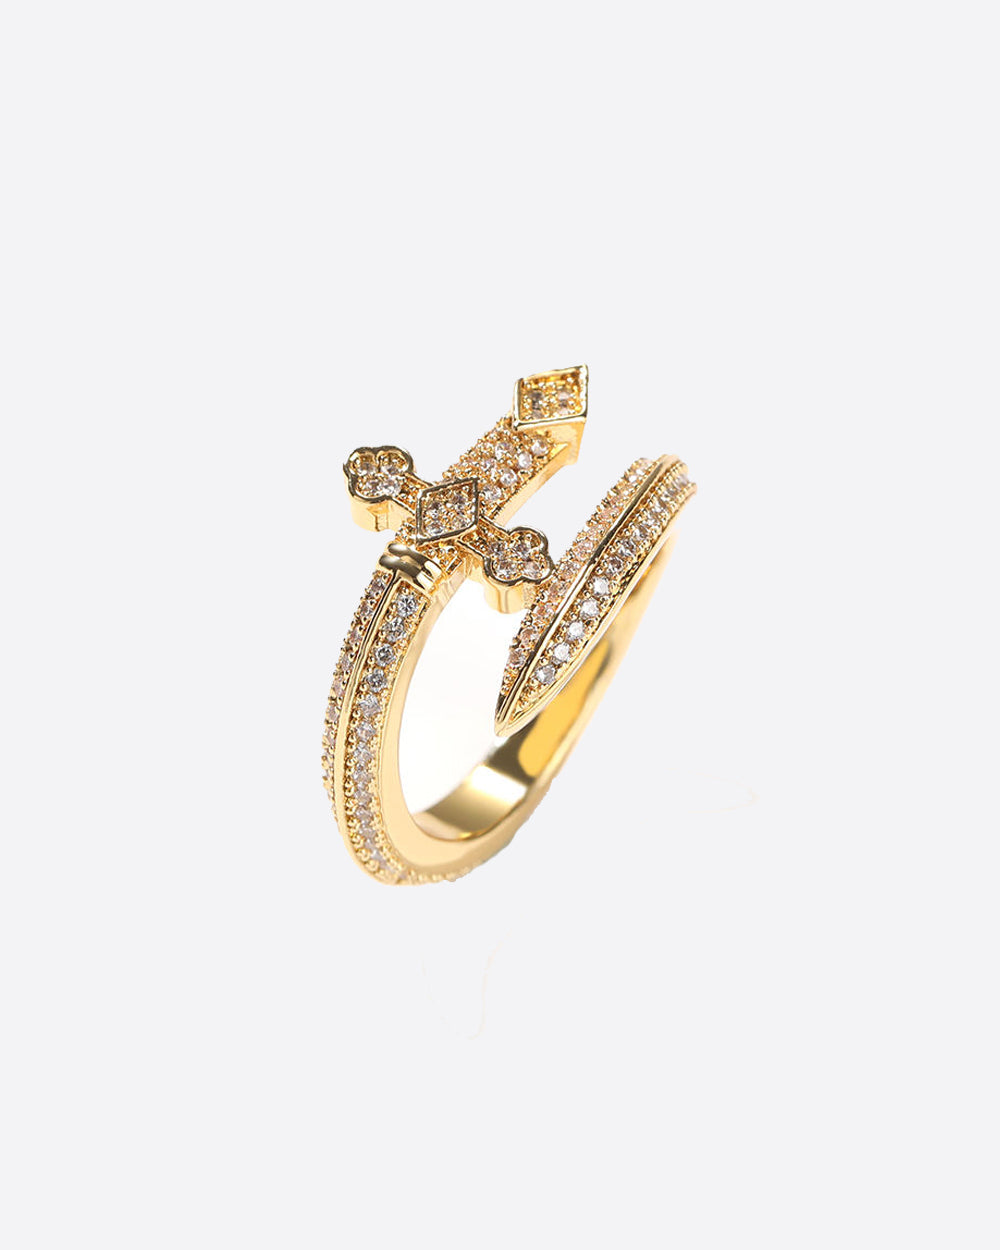 ICY SWORD RING. - 18K GOLD